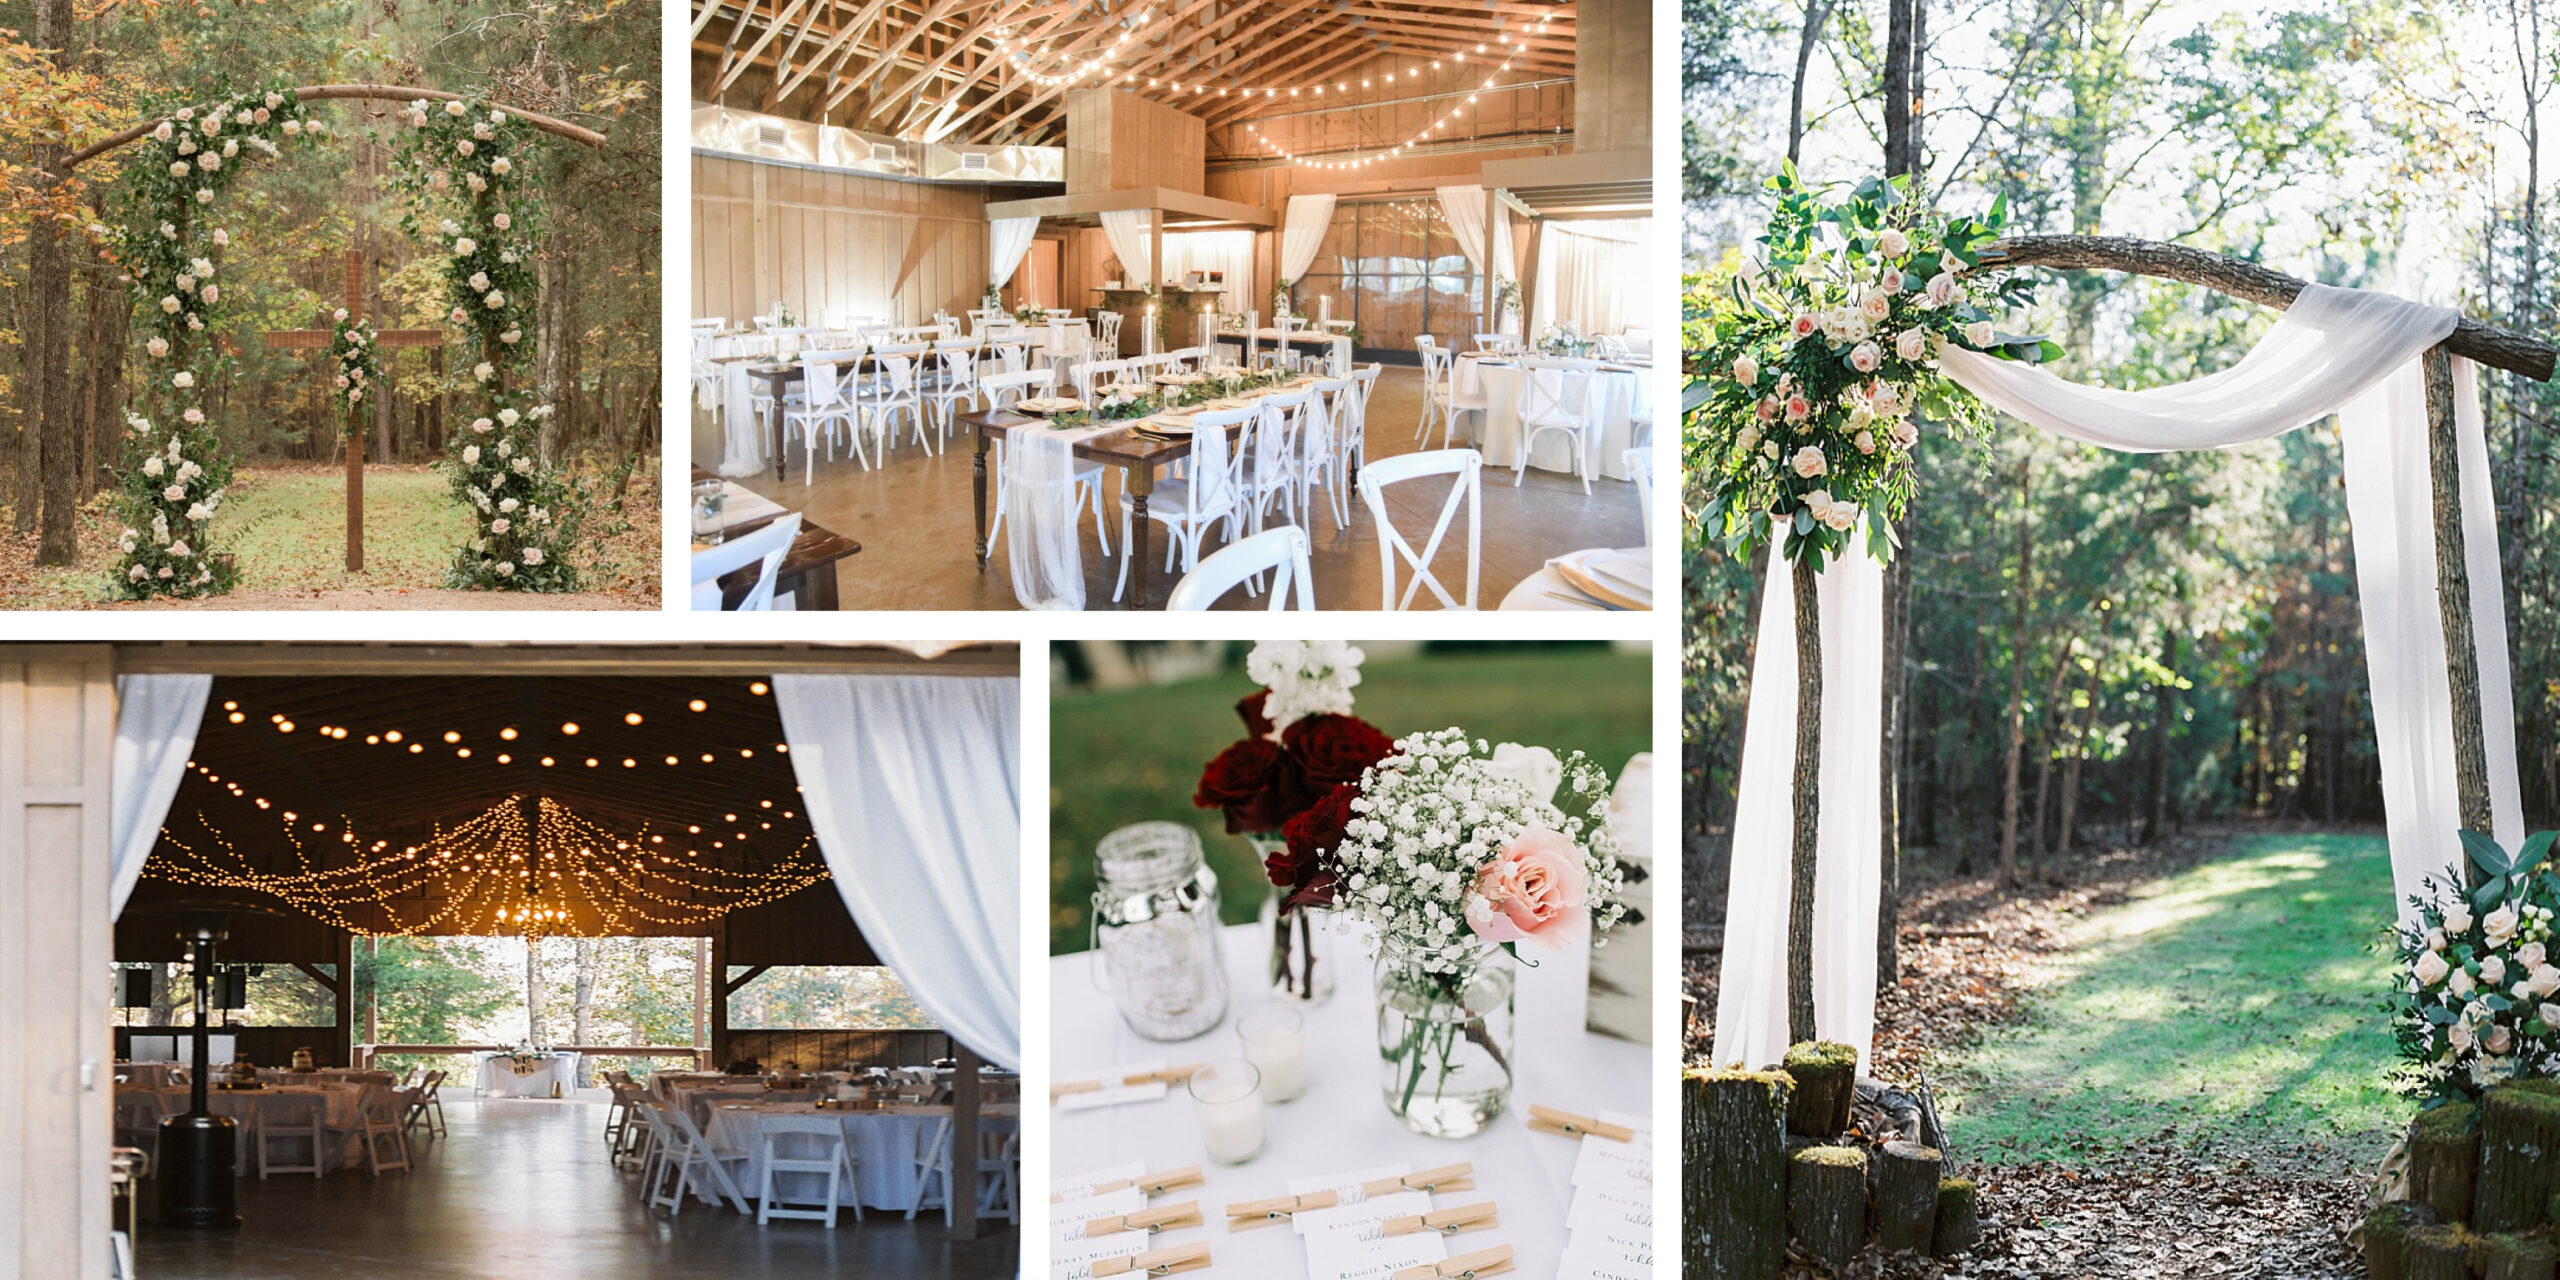 Wedding Themes Perfect for Charlotte, North Carolina - Winnie Couture